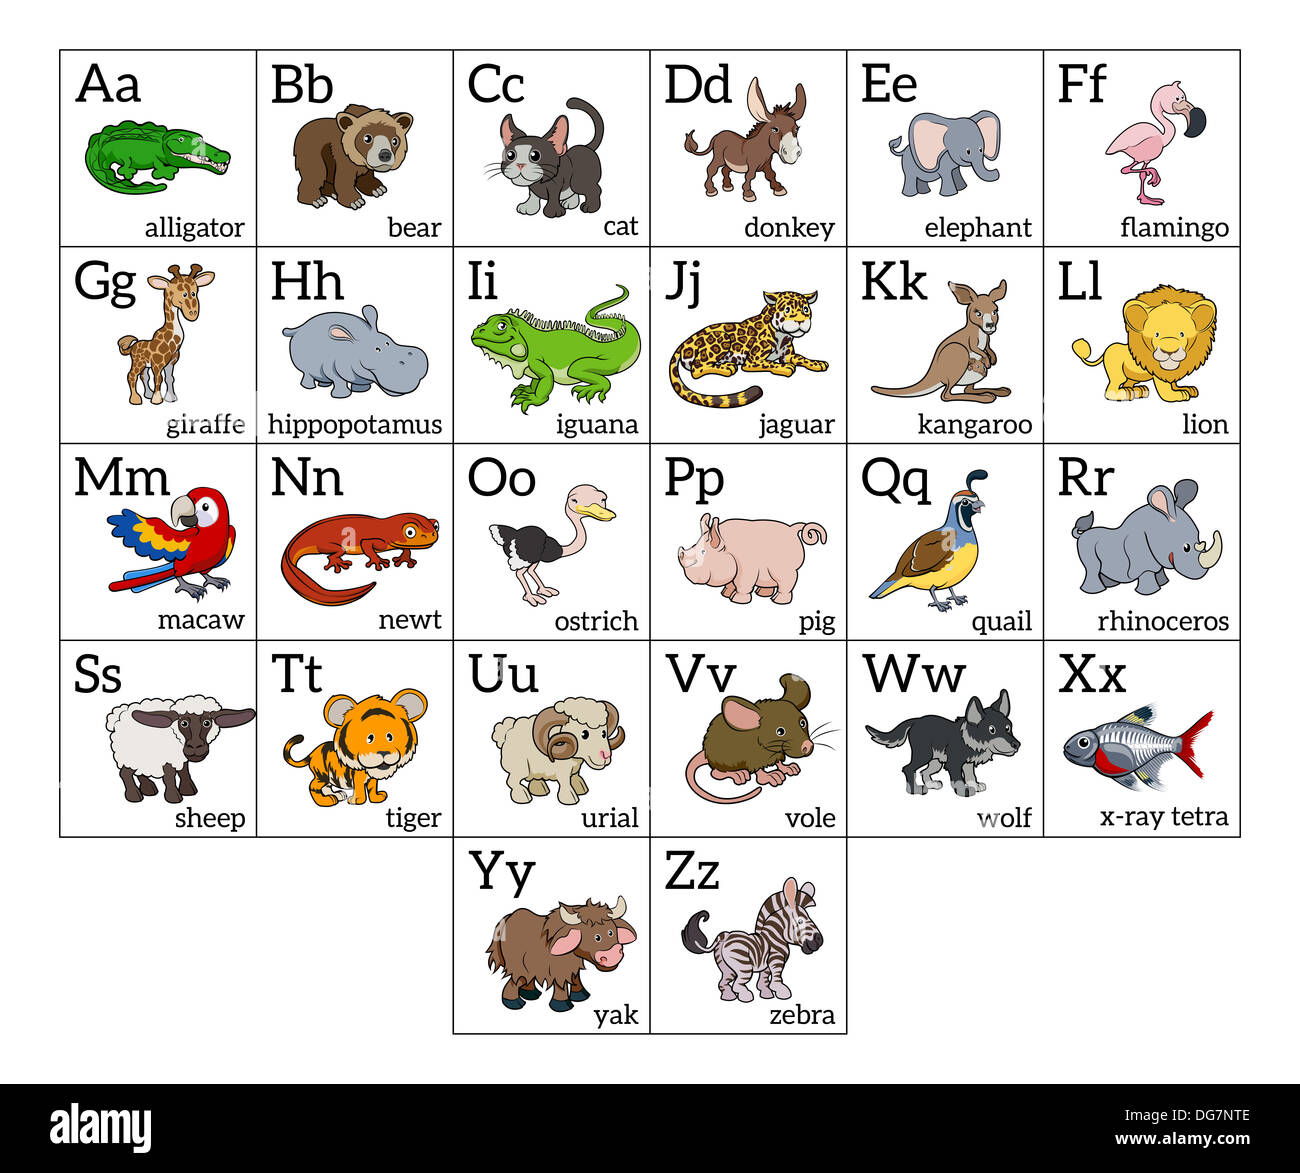 Cartoon animal alphabet learning chart with cartoon animal for each letter  and upper and lowercase letters and animal names Stock Photo - Alamy